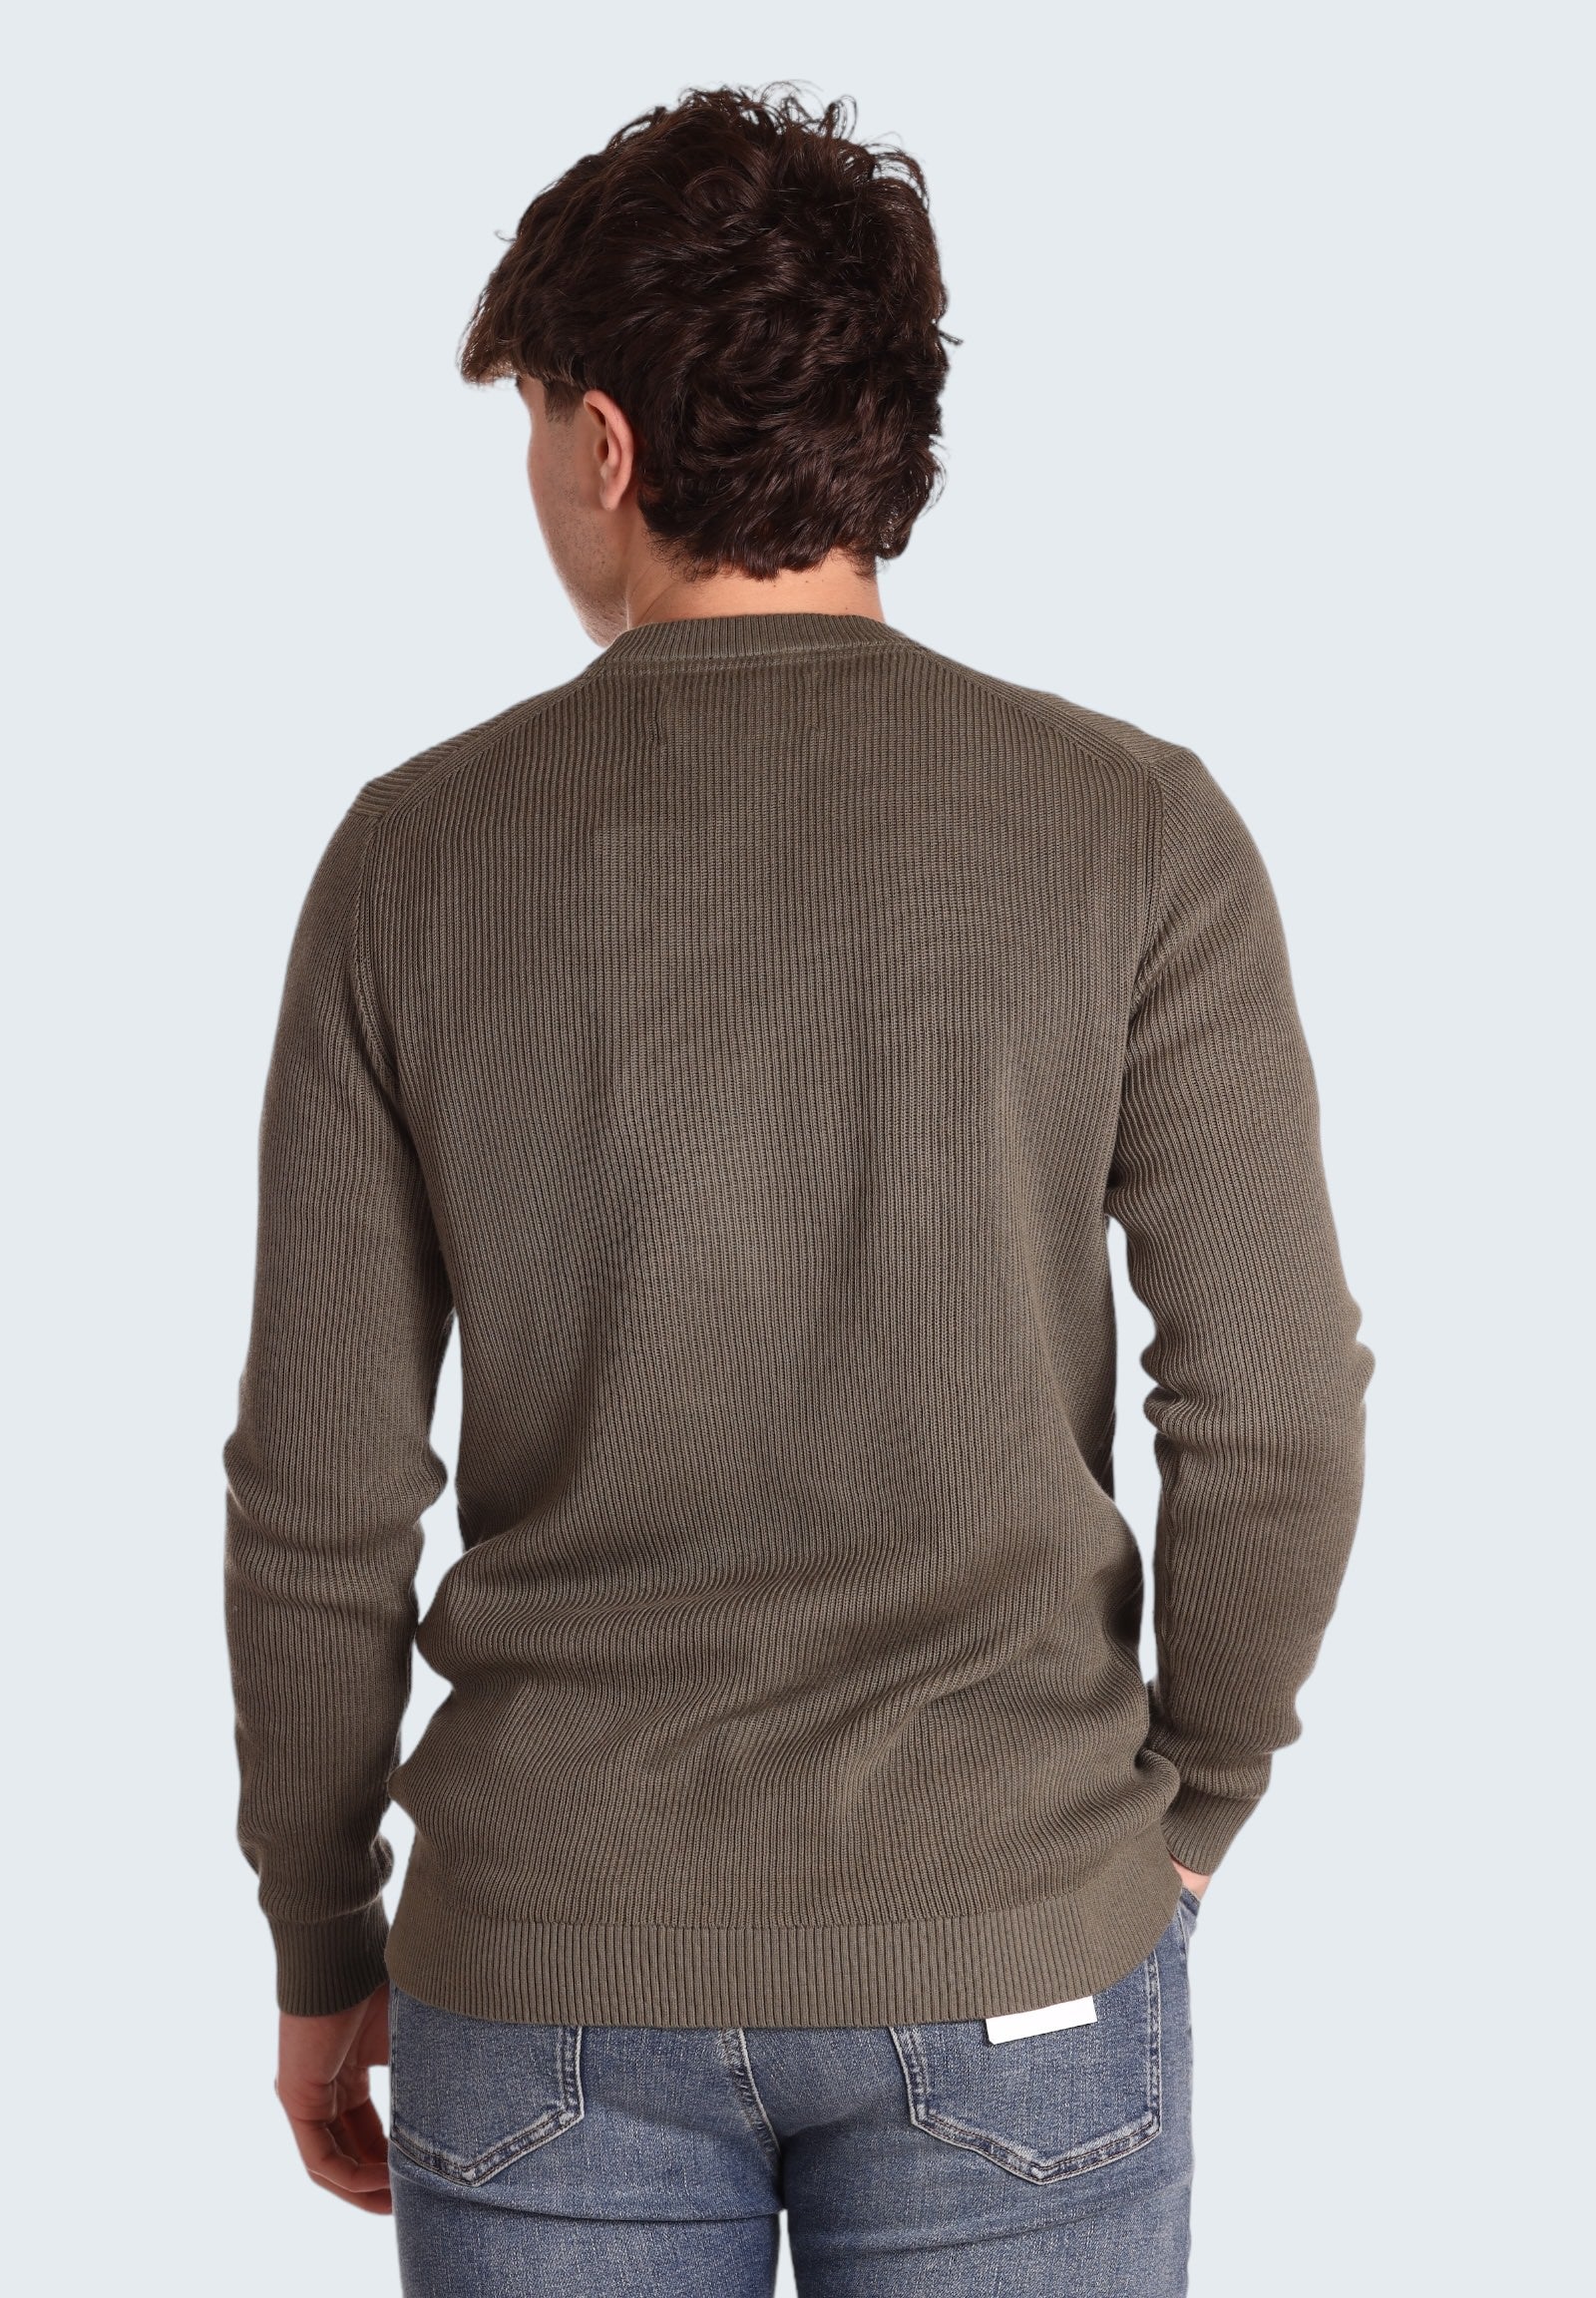 Maglione J30j324598 Dusty Olive